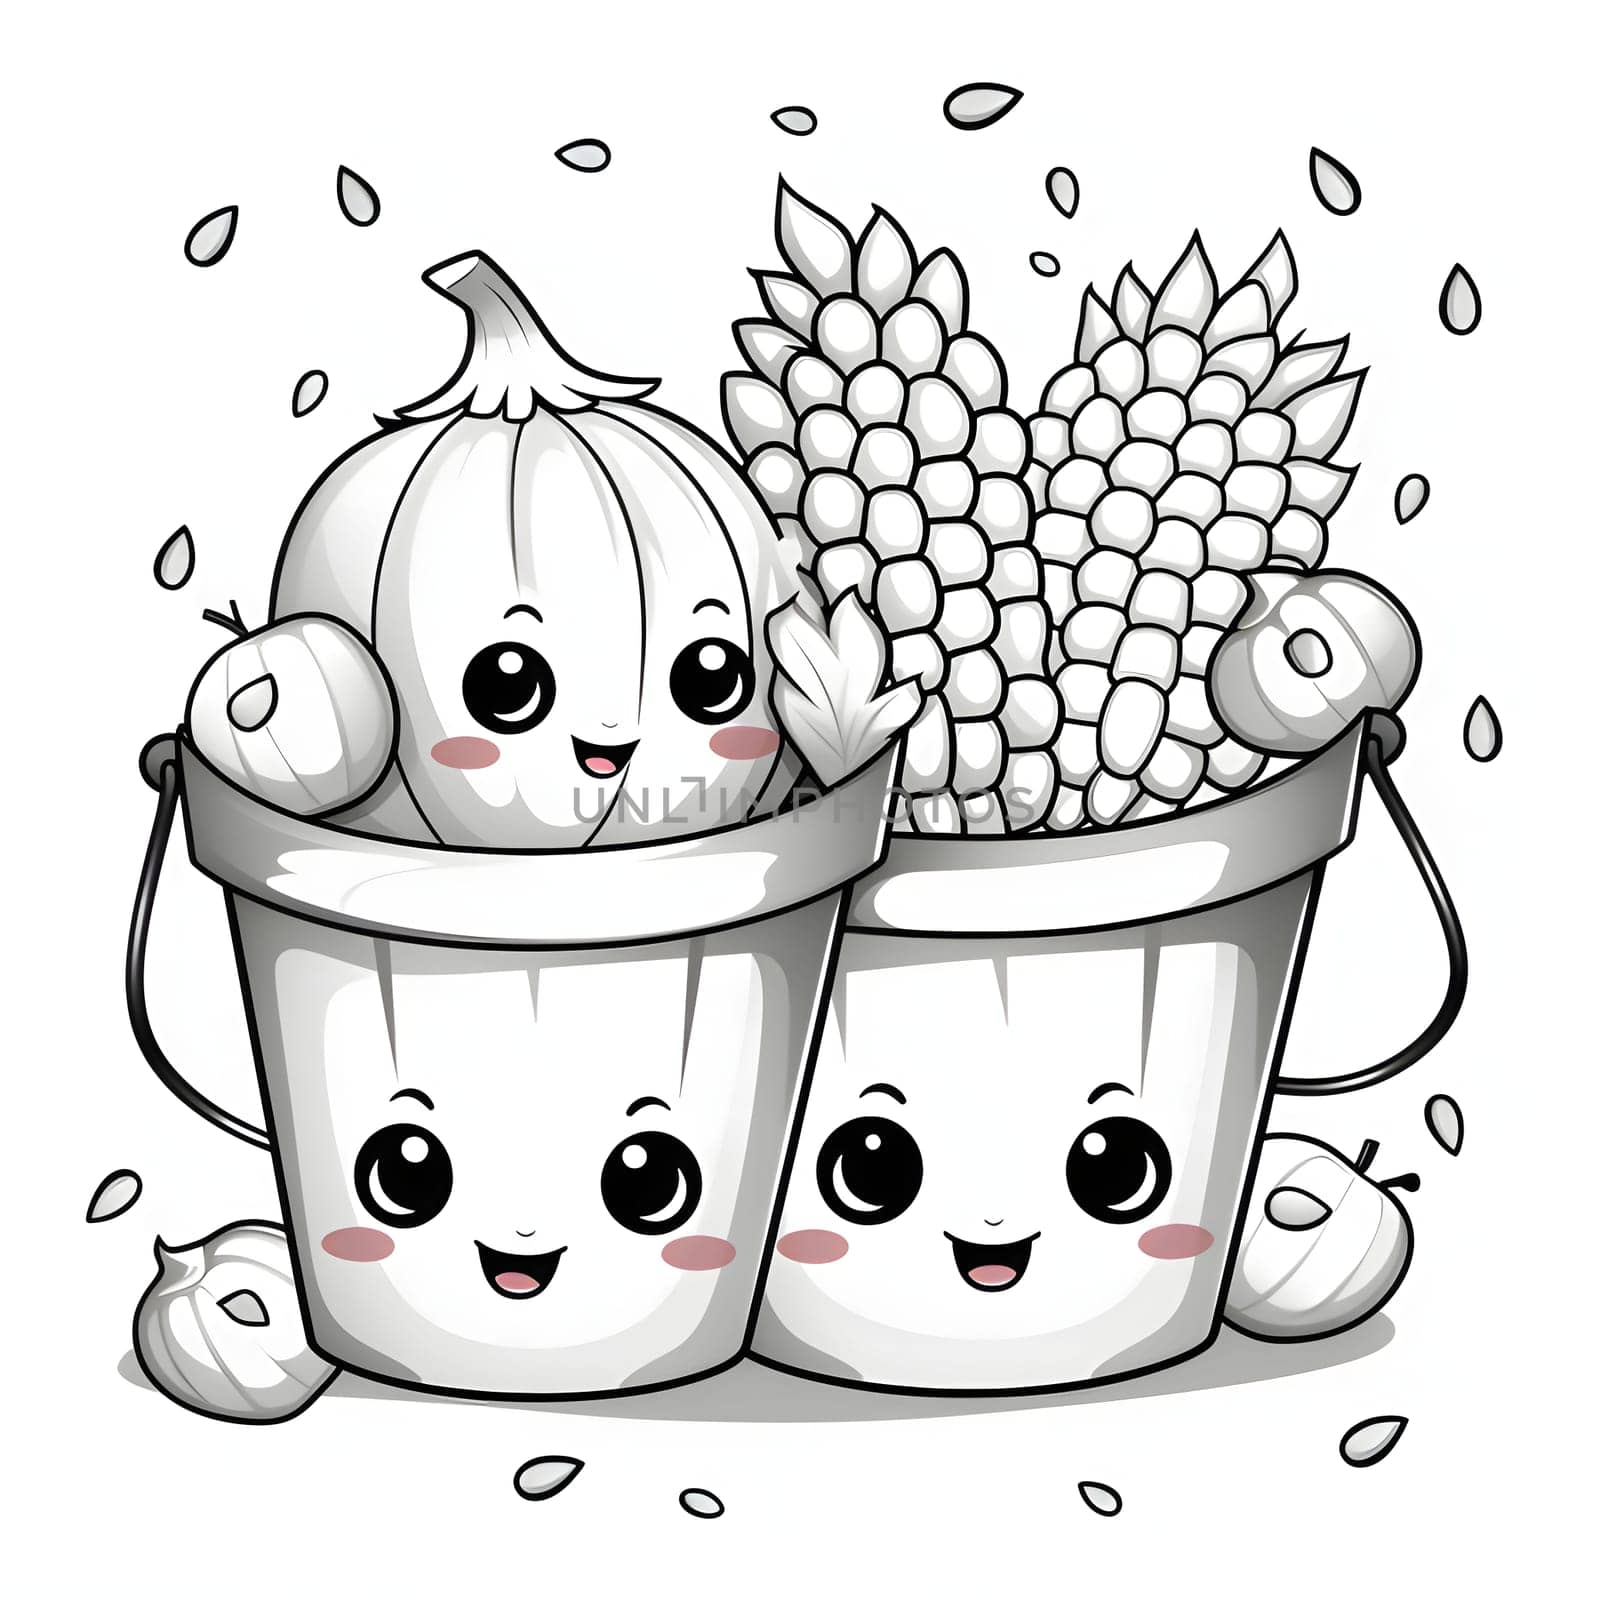 Black and White coloring book cheerful buckets with smiles, and in them corn cobs and pumpkin. Corn as a dish of thanksgiving for the harvest, picture on a white isolated background. by ThemesS